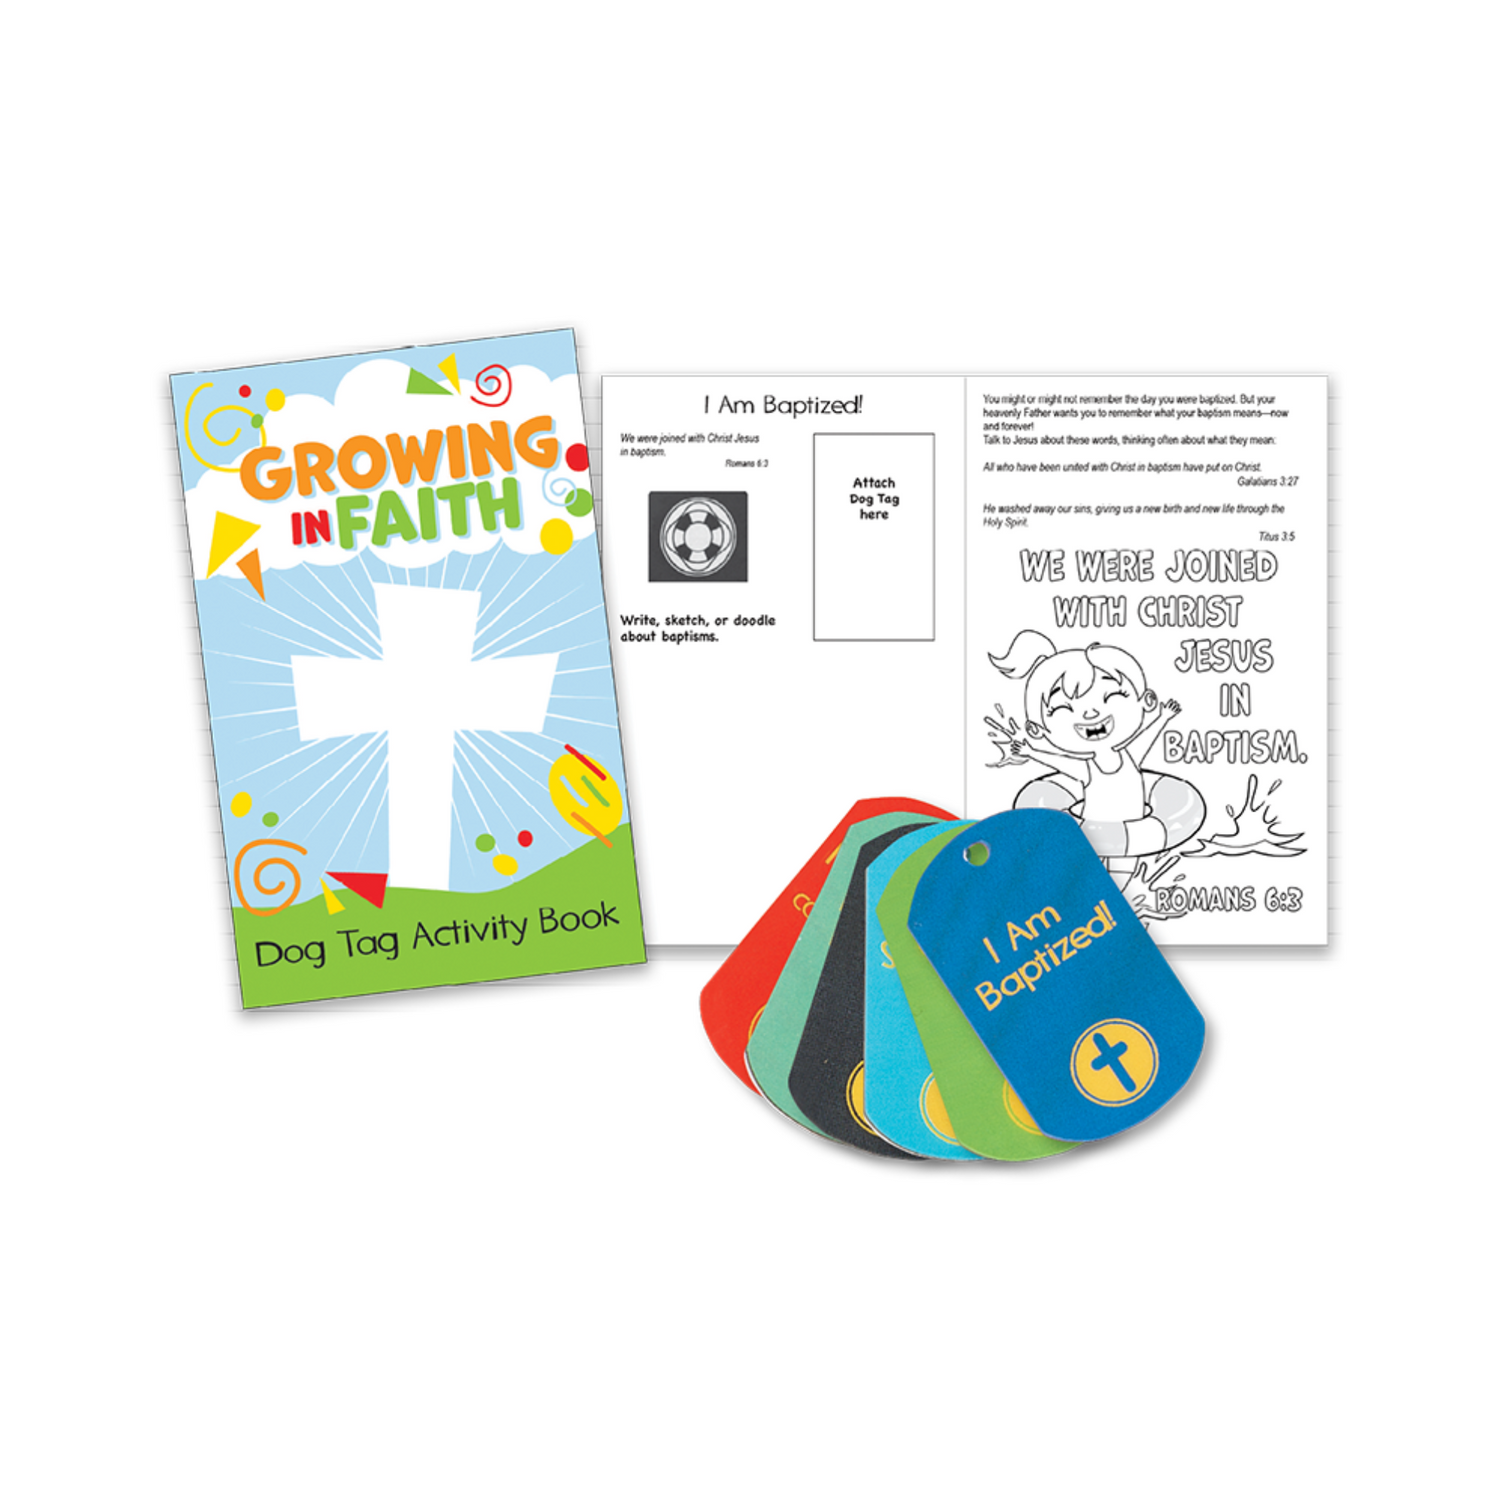 Growing in Faith 6 Activity Books & Dog Tags for Christian Children's Ministry